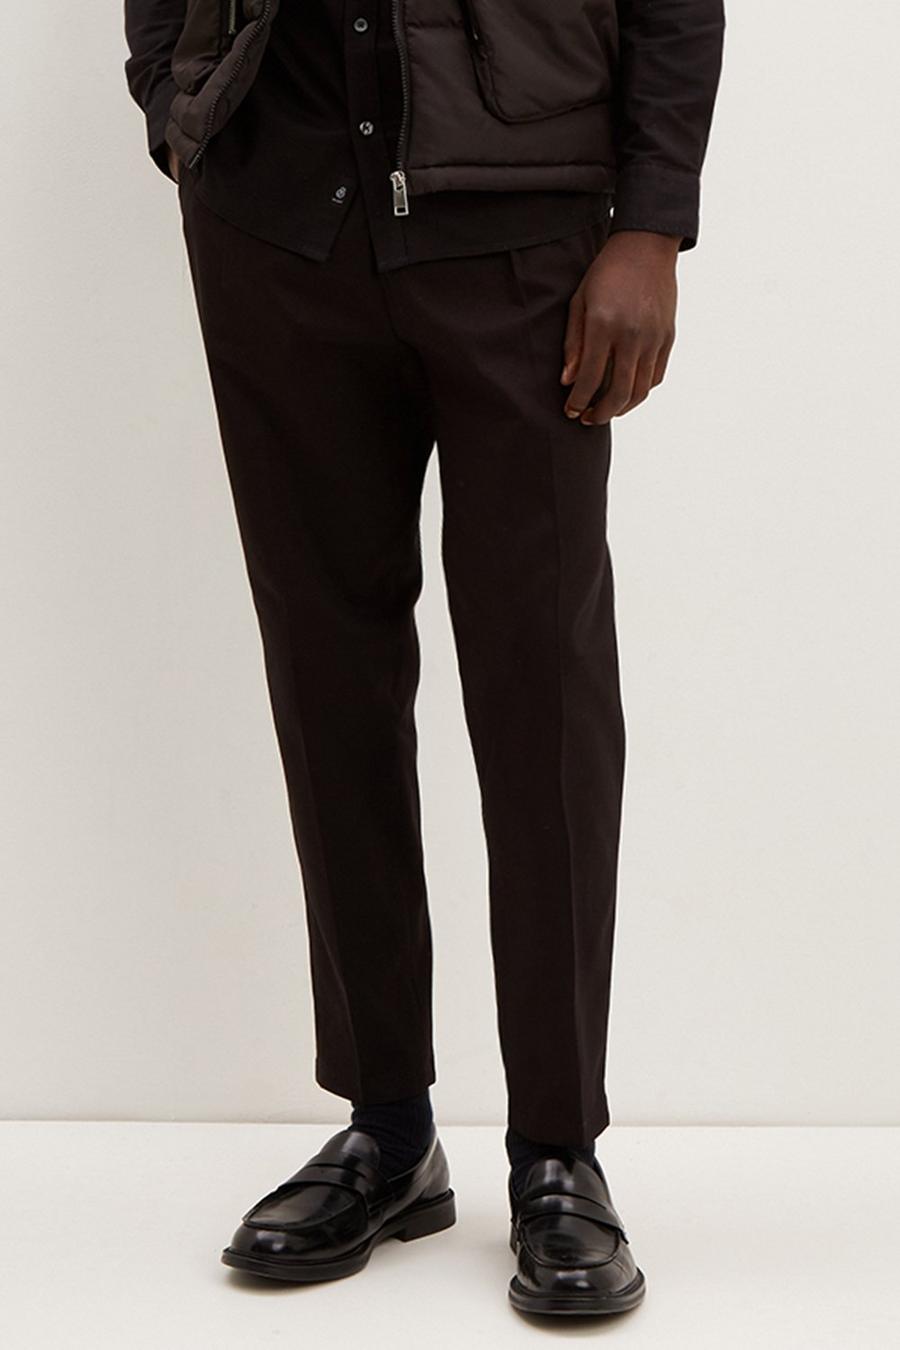 Black Pleat Front Tapered Fit Trouser